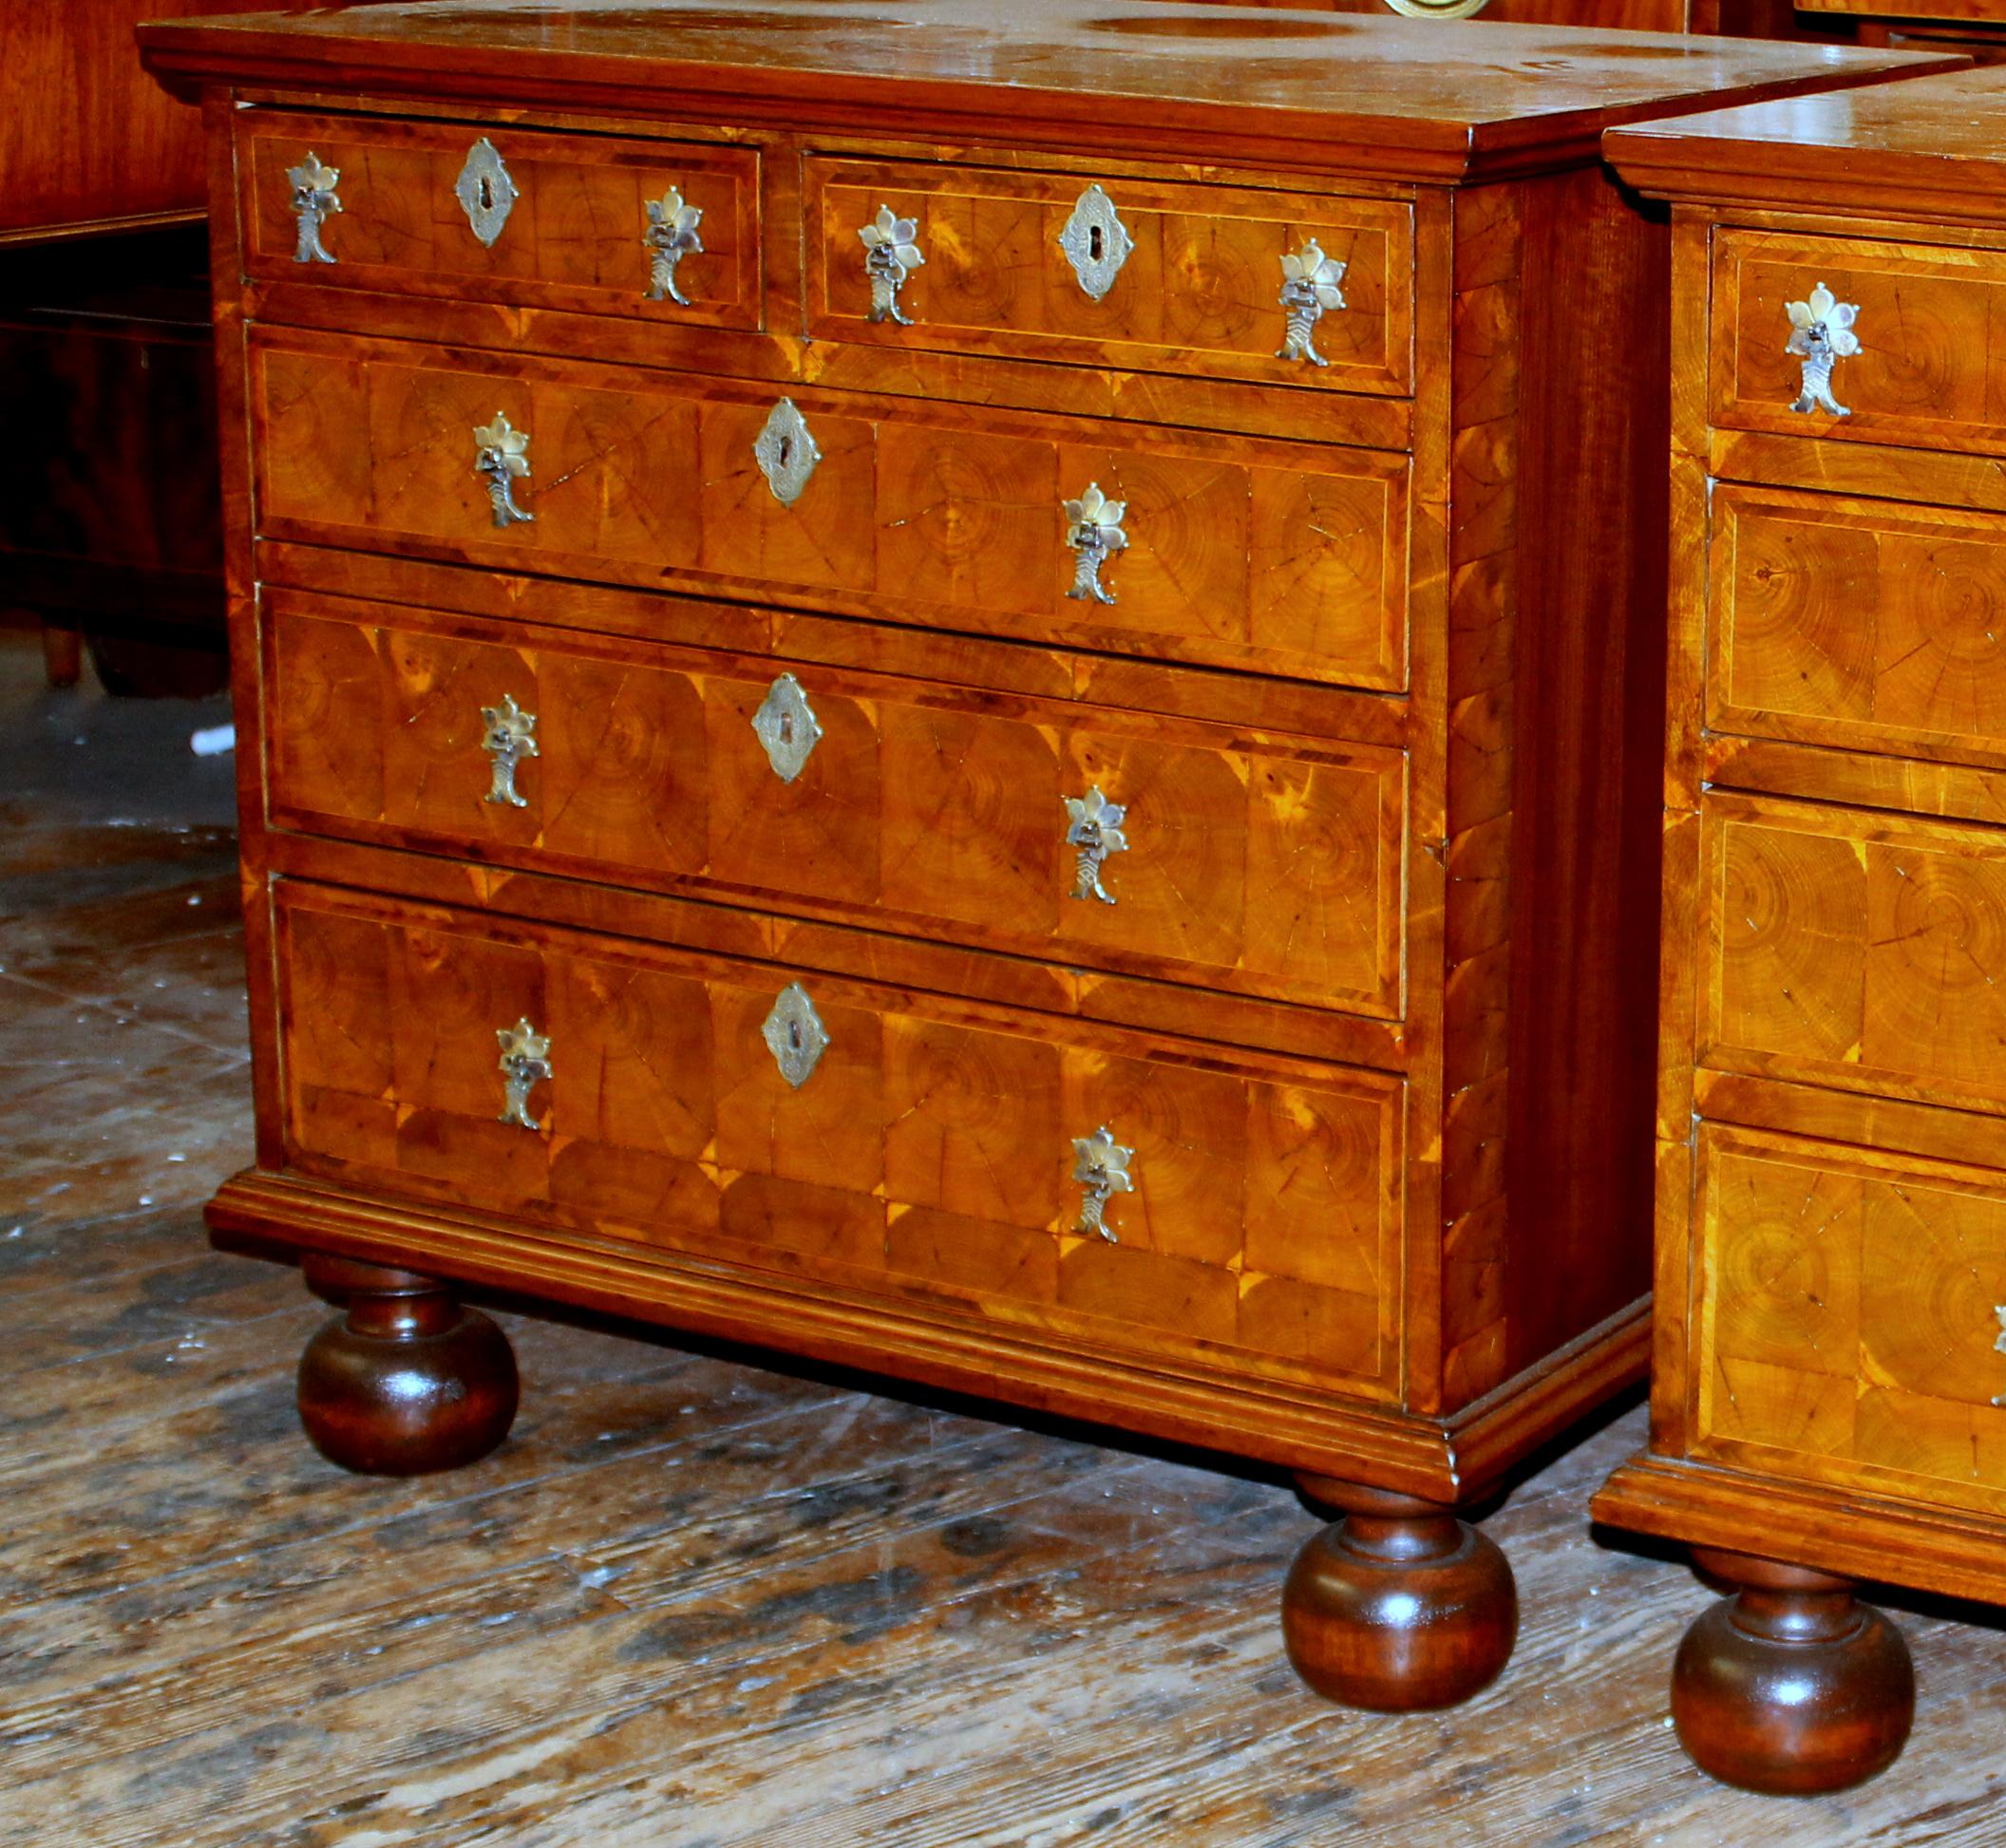 Pair of exceptional quality antique English inlaid laburnum oyster Veneer Queen Anne Revival bachelor's chests. Queen Anne Revival pieces were popular during the mid to late 19th century. Even though the originals would have been from circa